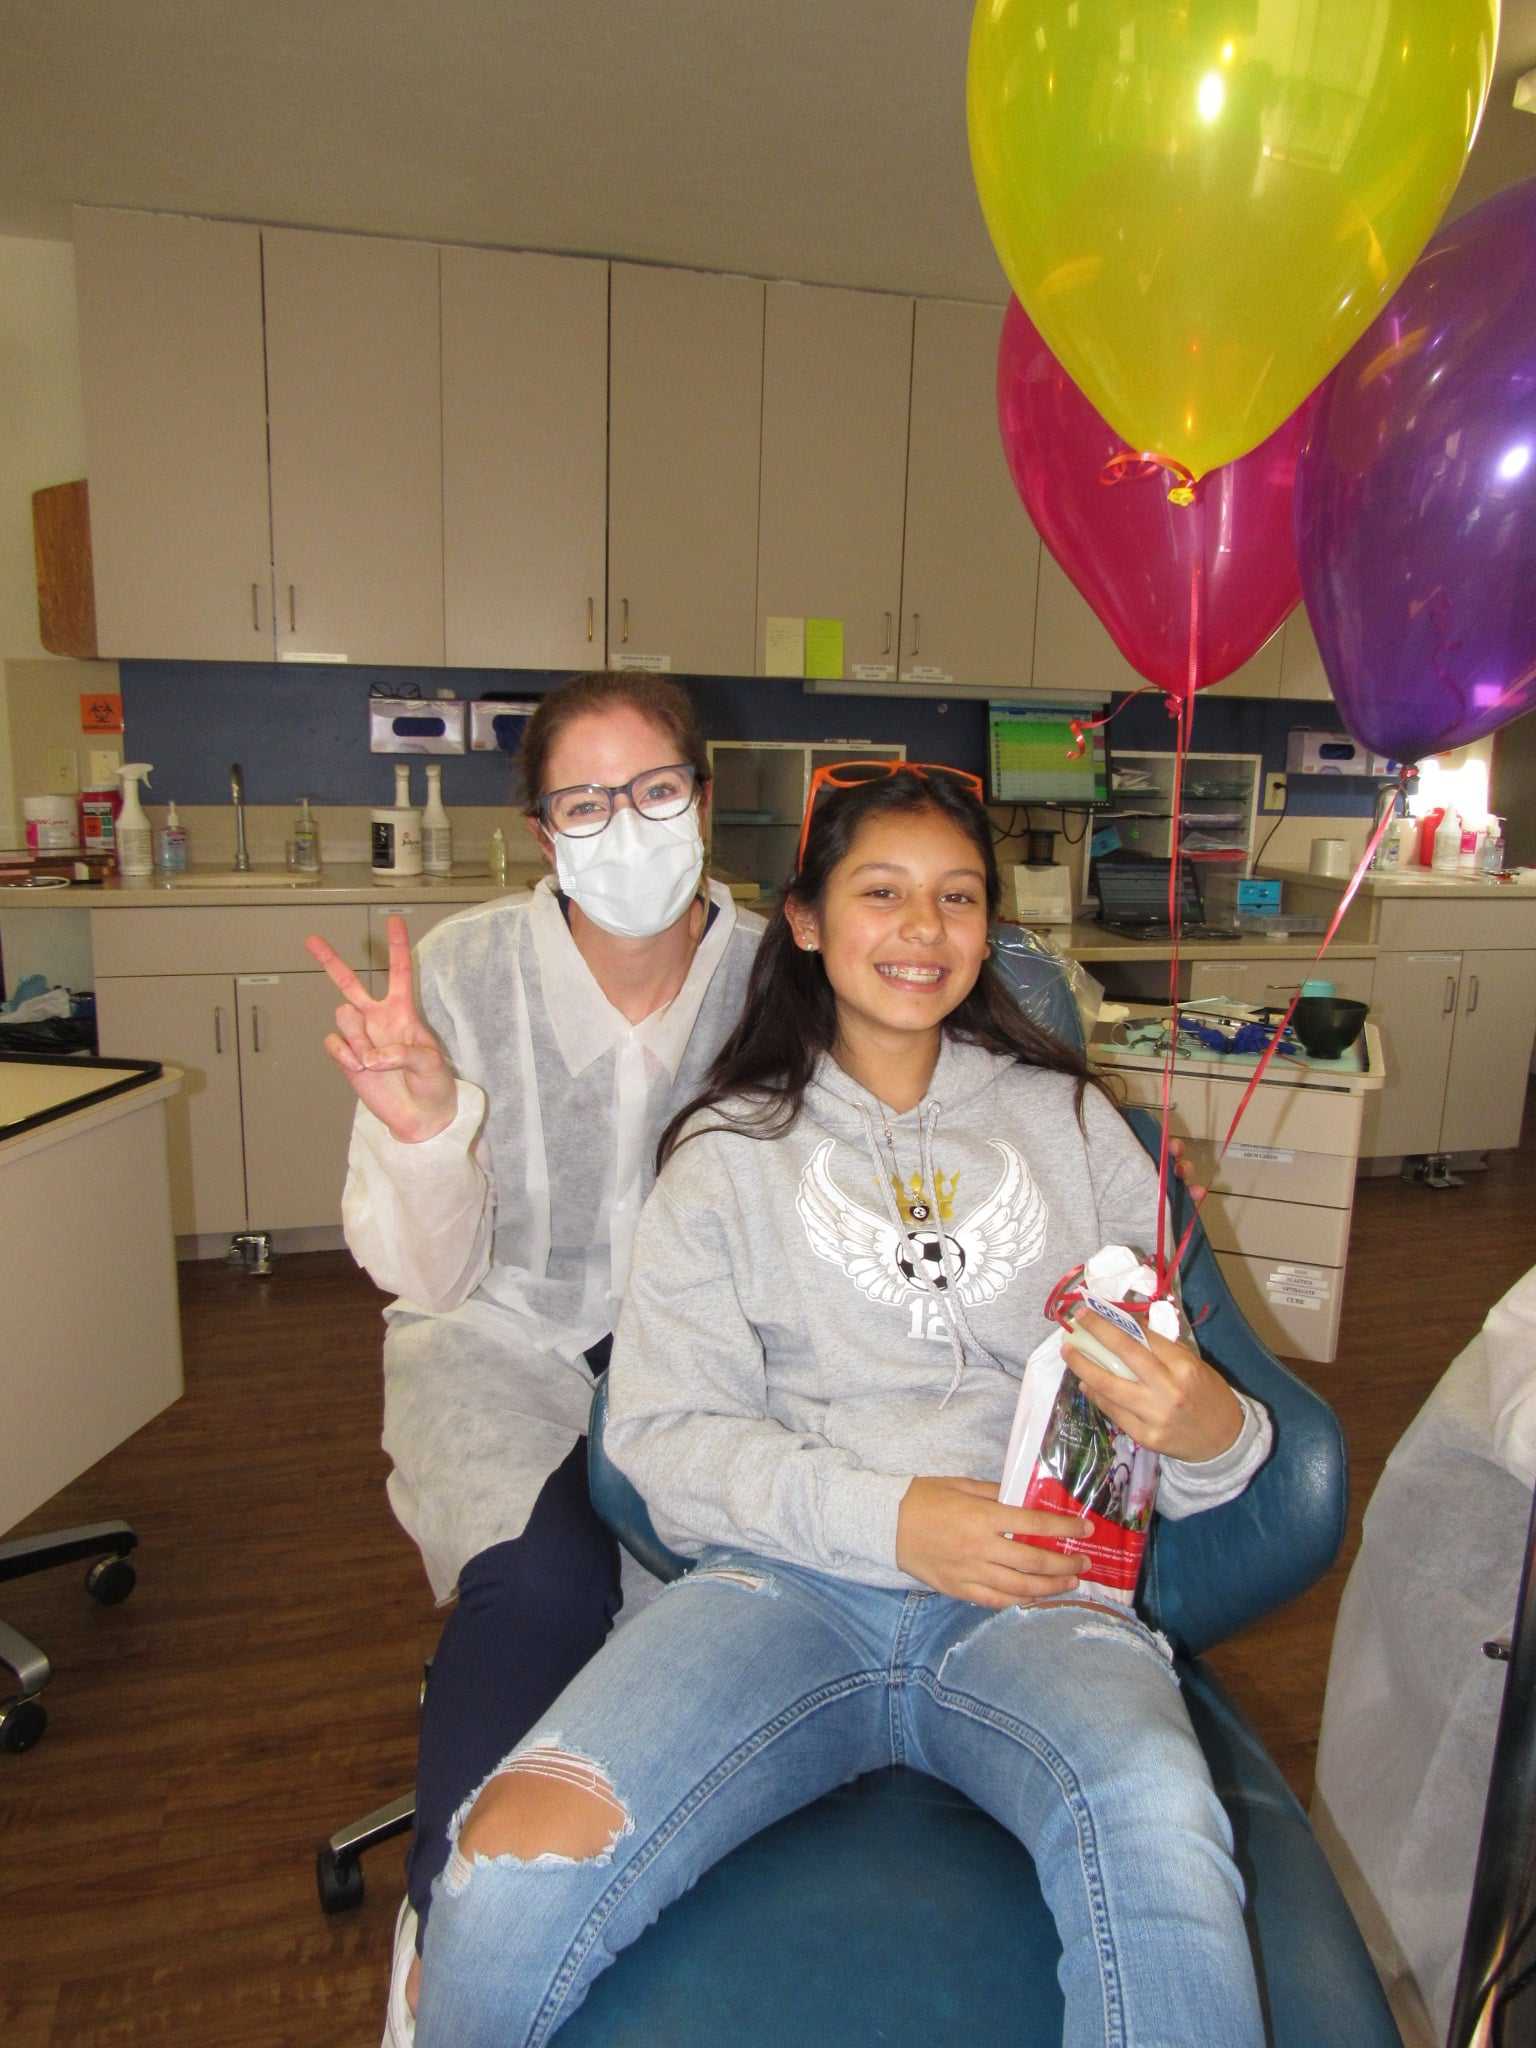 Team member posing with a patient with balloons